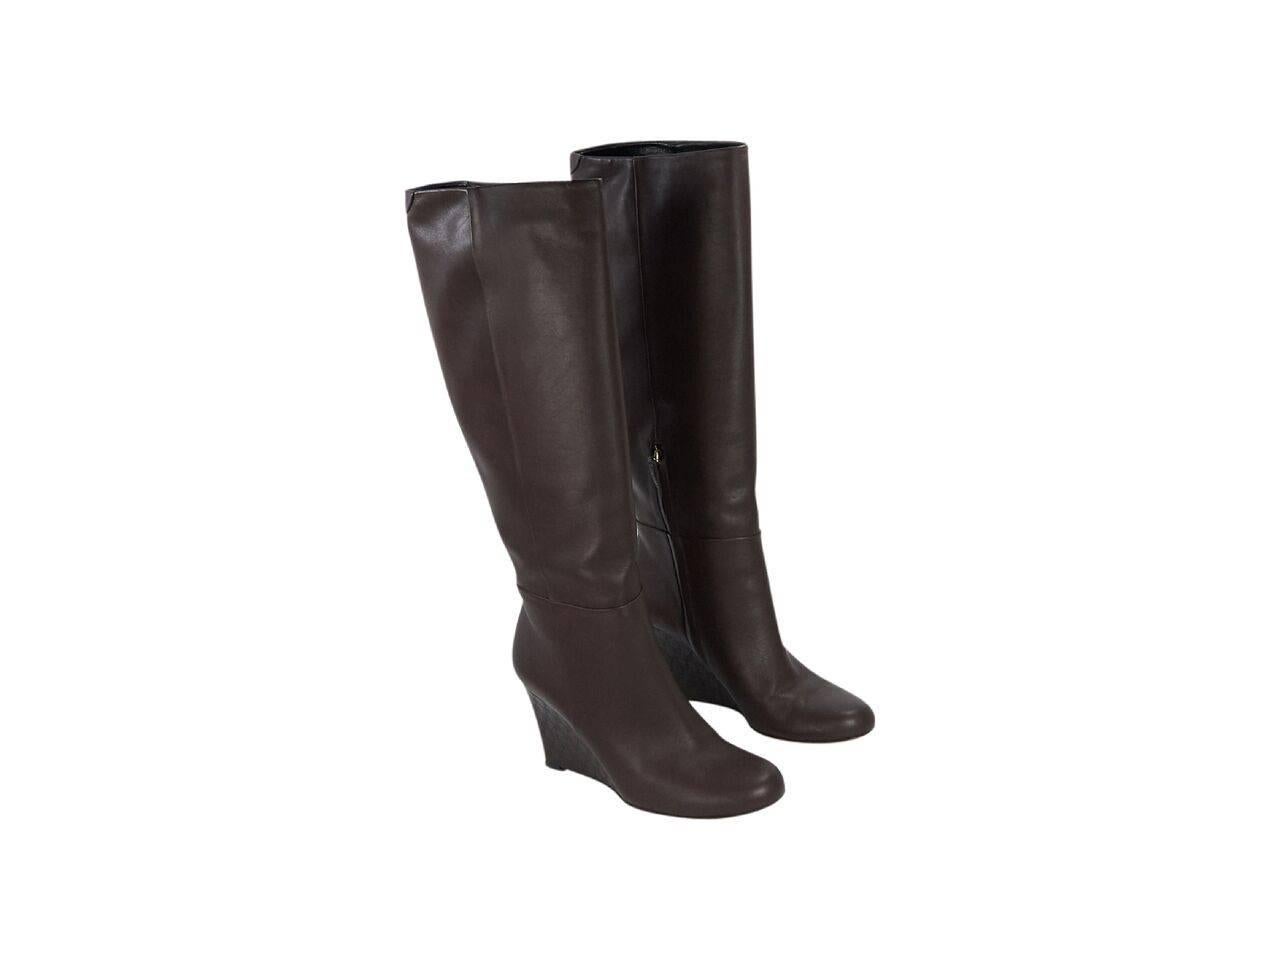 Product details:  Brown leather tall wedge boots by Gucci.  Inner half zip closure.  Guccissima embossed wedge.  Round toe. 
Condition: Pre-owned. Very good.
Est. Retail $ 1,298.00